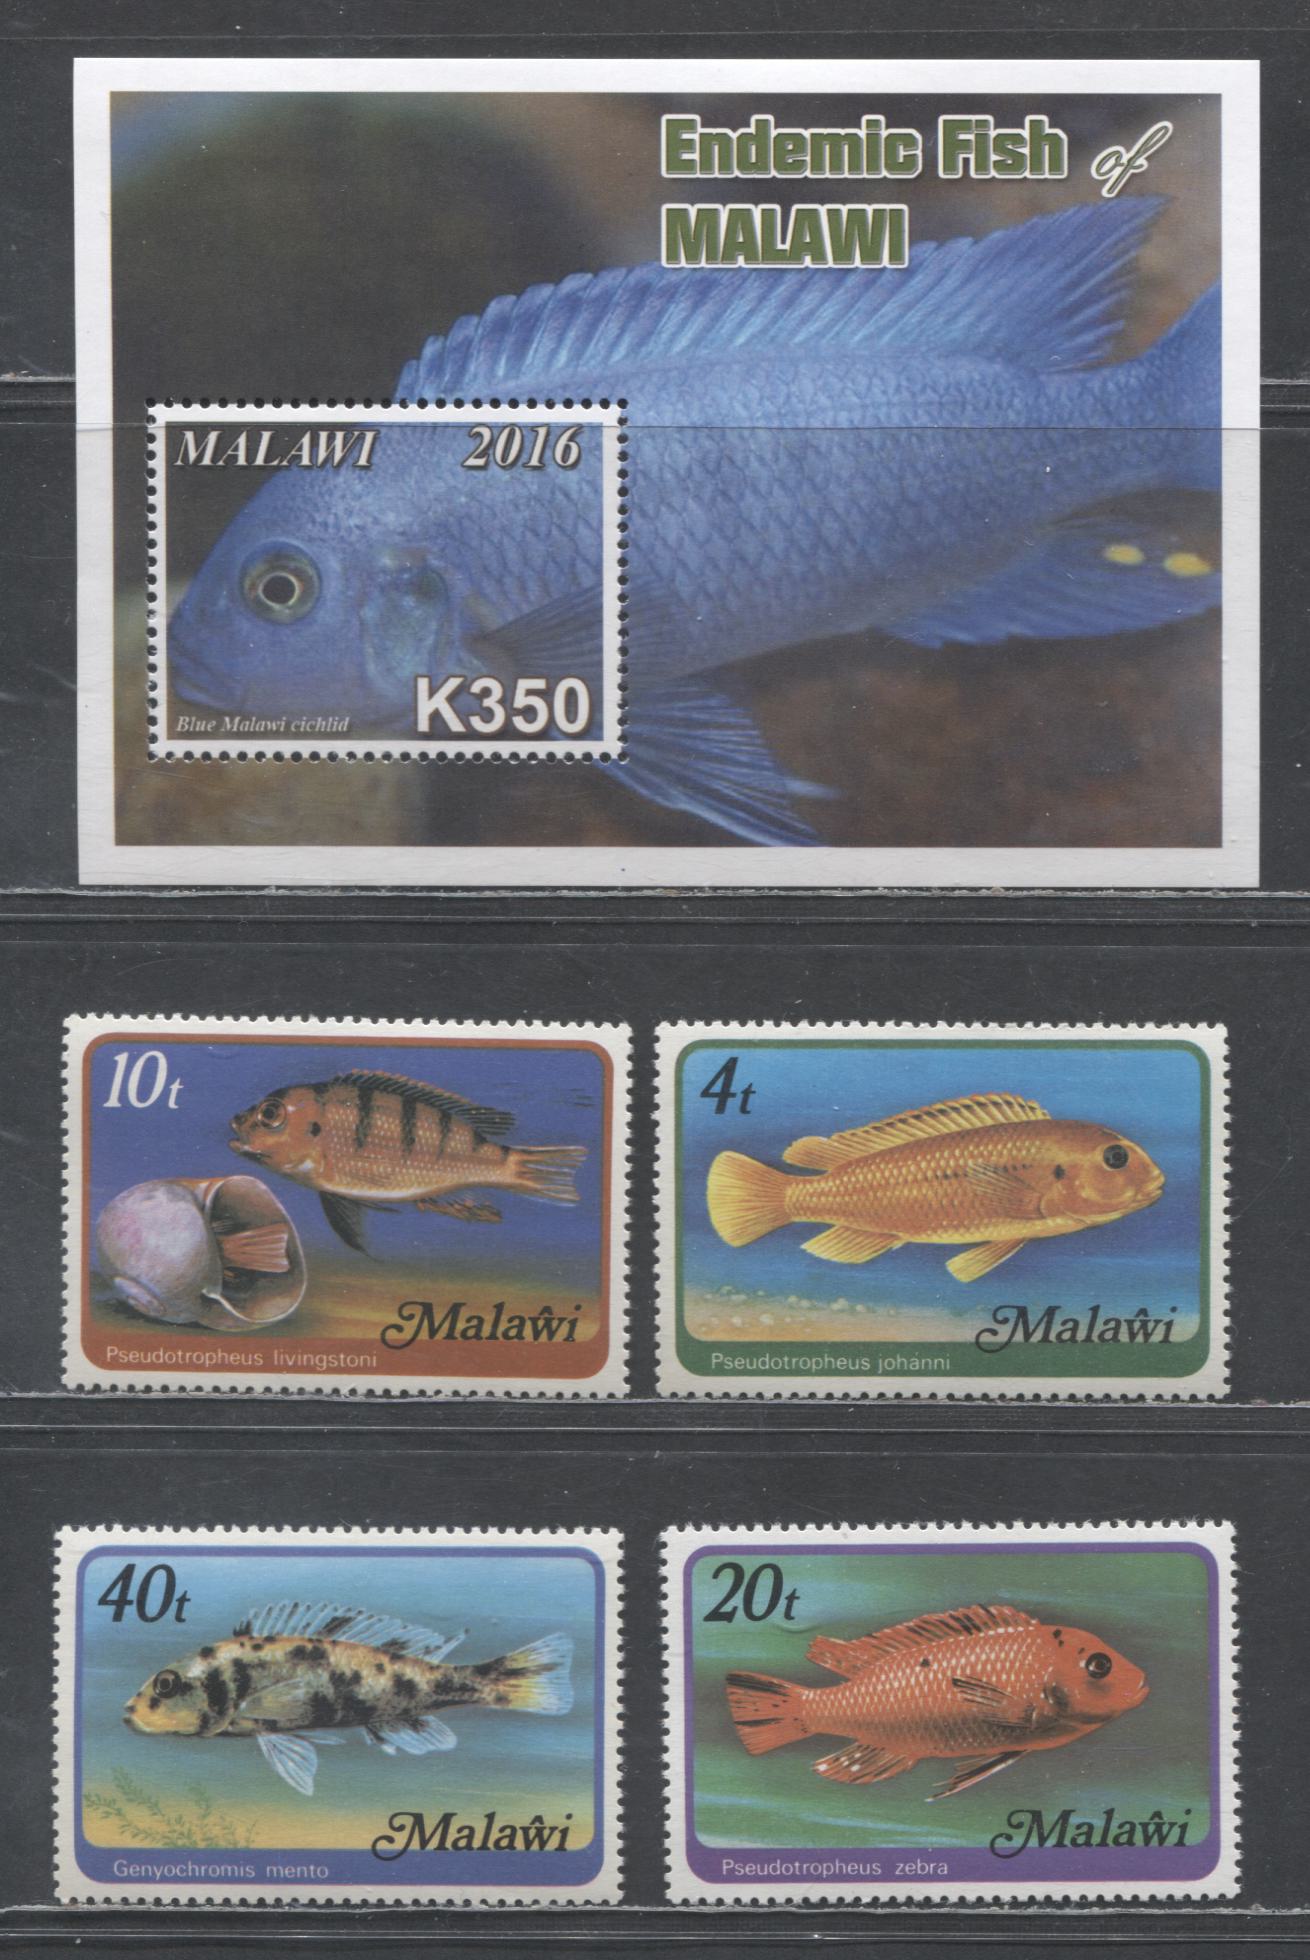 Lot 78 Malawi SC#307/807 1977-2016 Fish Issue, 5 VFNH Singles & Souvenir Sheet, Click on Listing to See ALL Pictures, 2017 Scott Cat. $4+